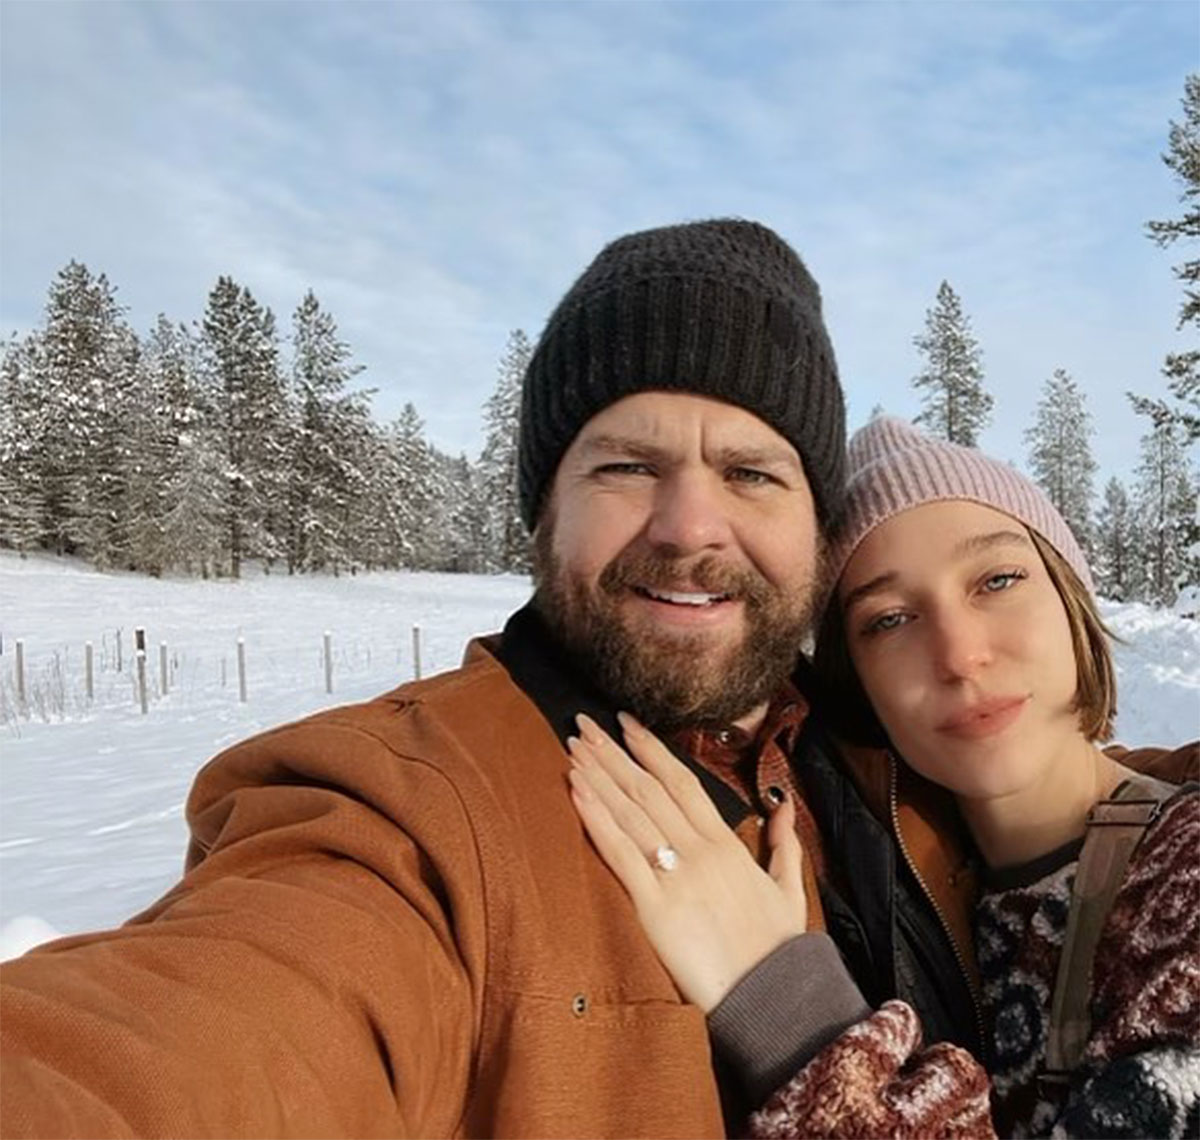 Jack Osbourne Engaged to Aree Gearhart After Lisa Stelly Divorce pic